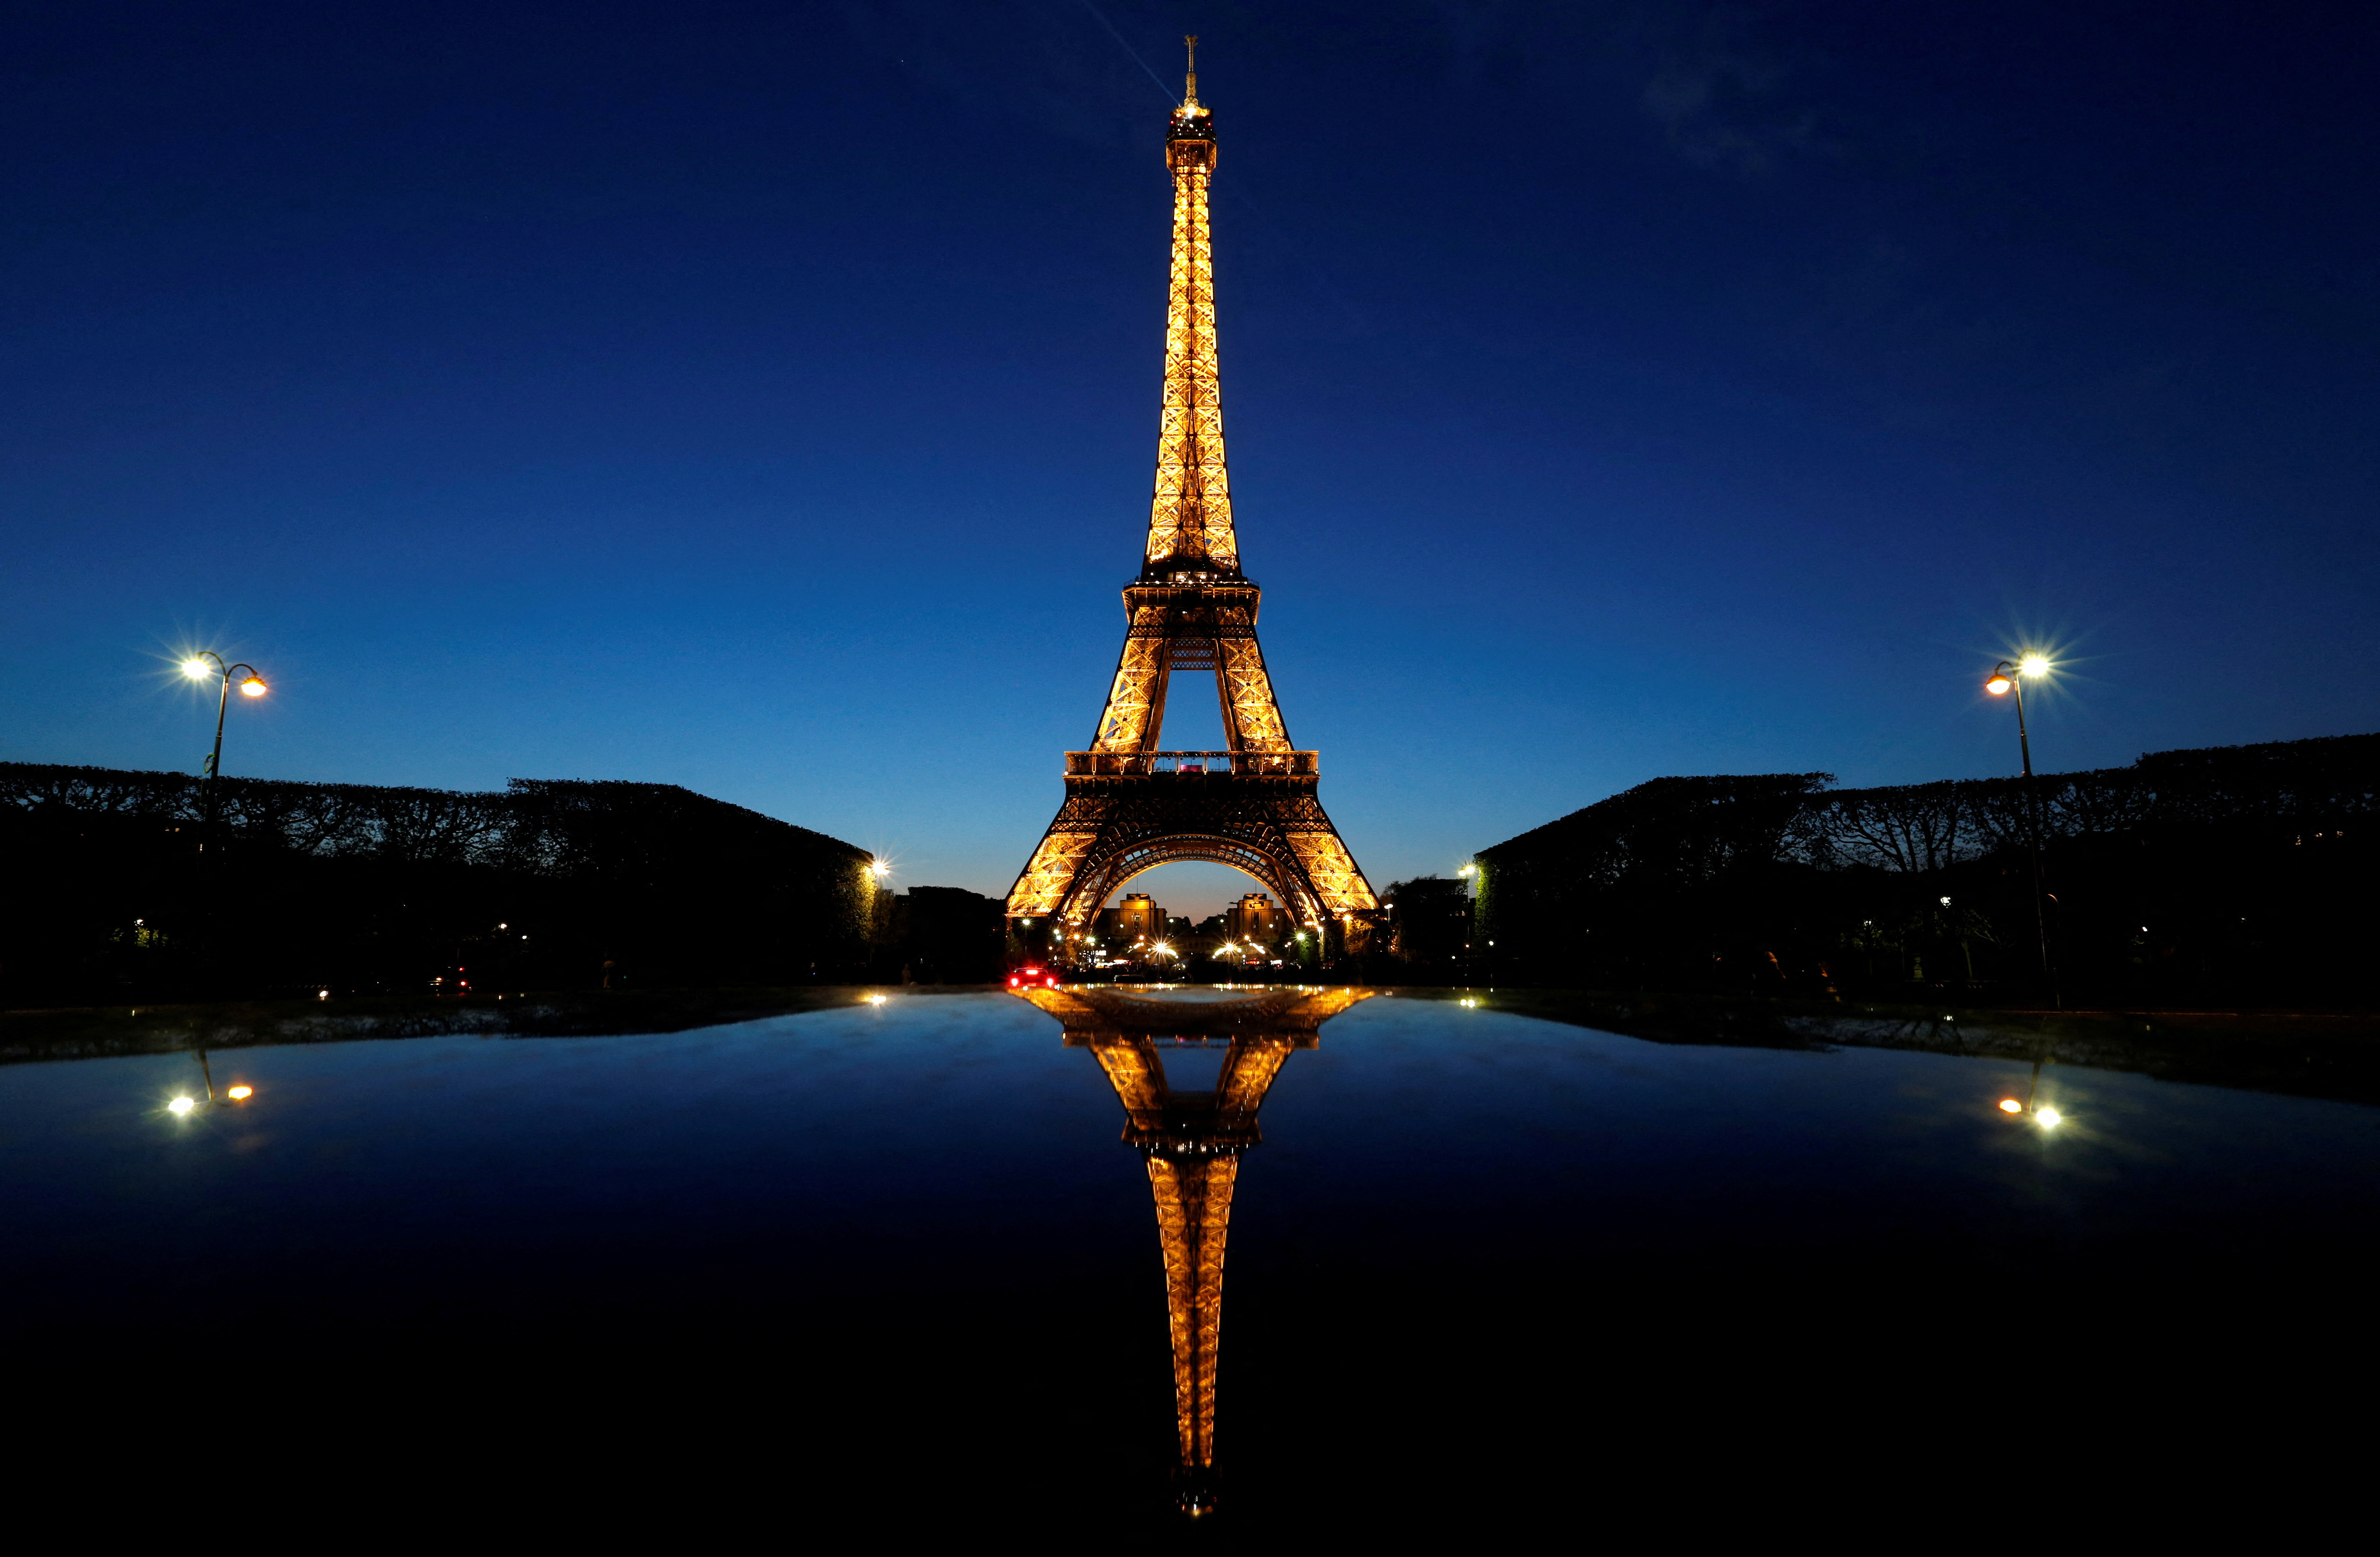 A night view shows the Eiffel tower in Paris